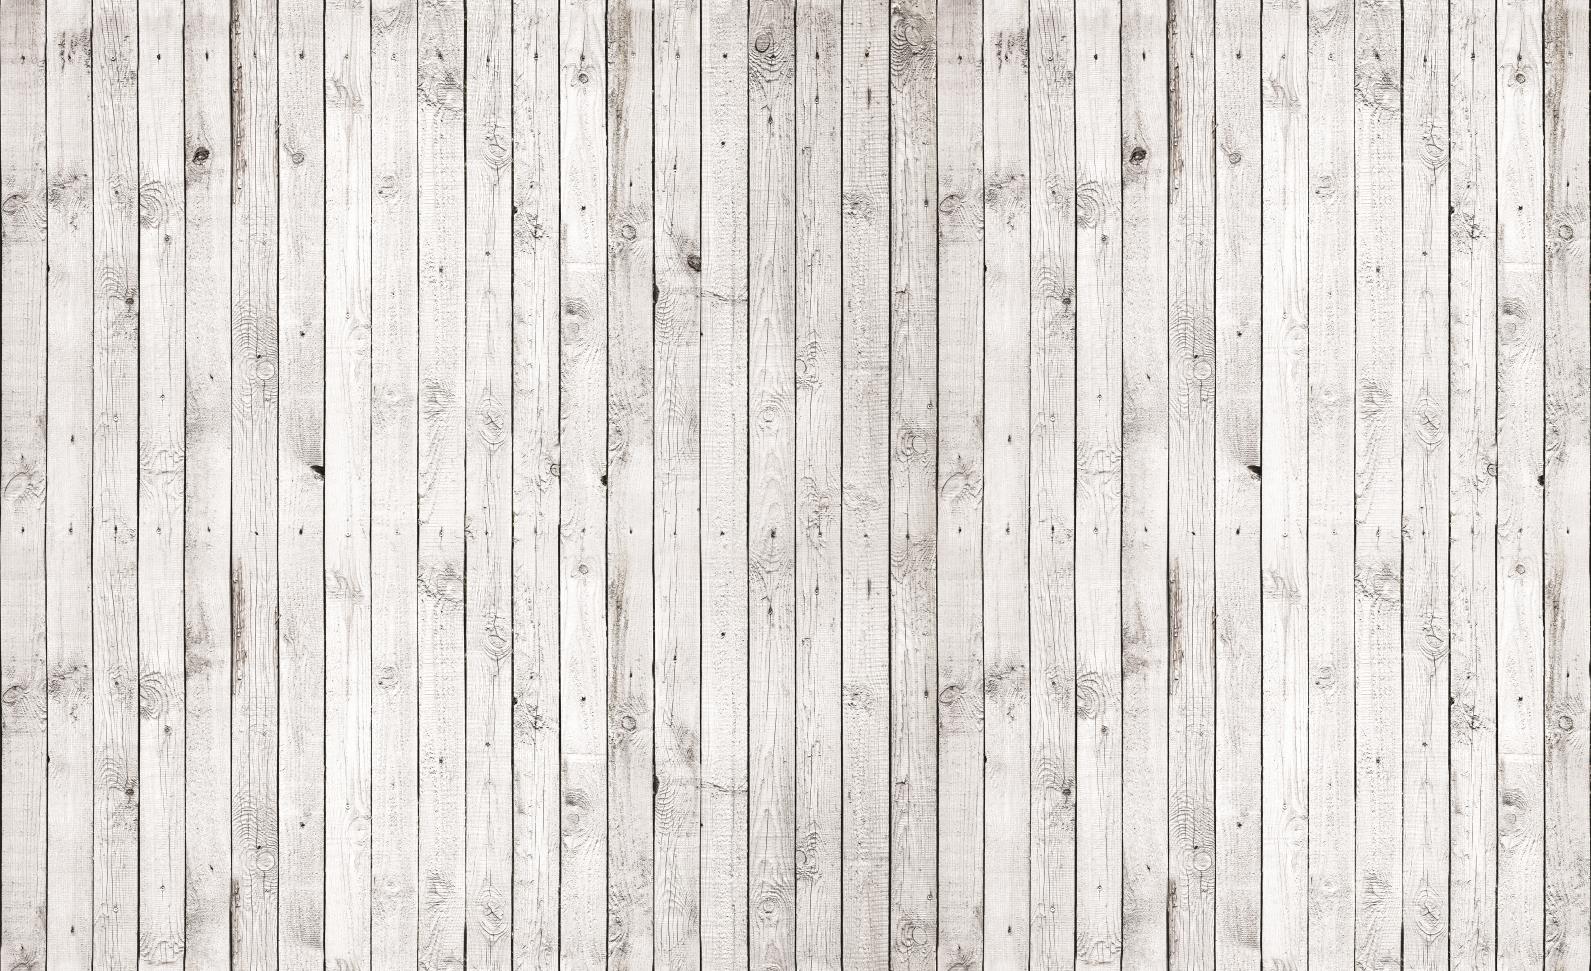 About Wood Planks Texture Photo Wallpaper Wall Mural Room 1013p